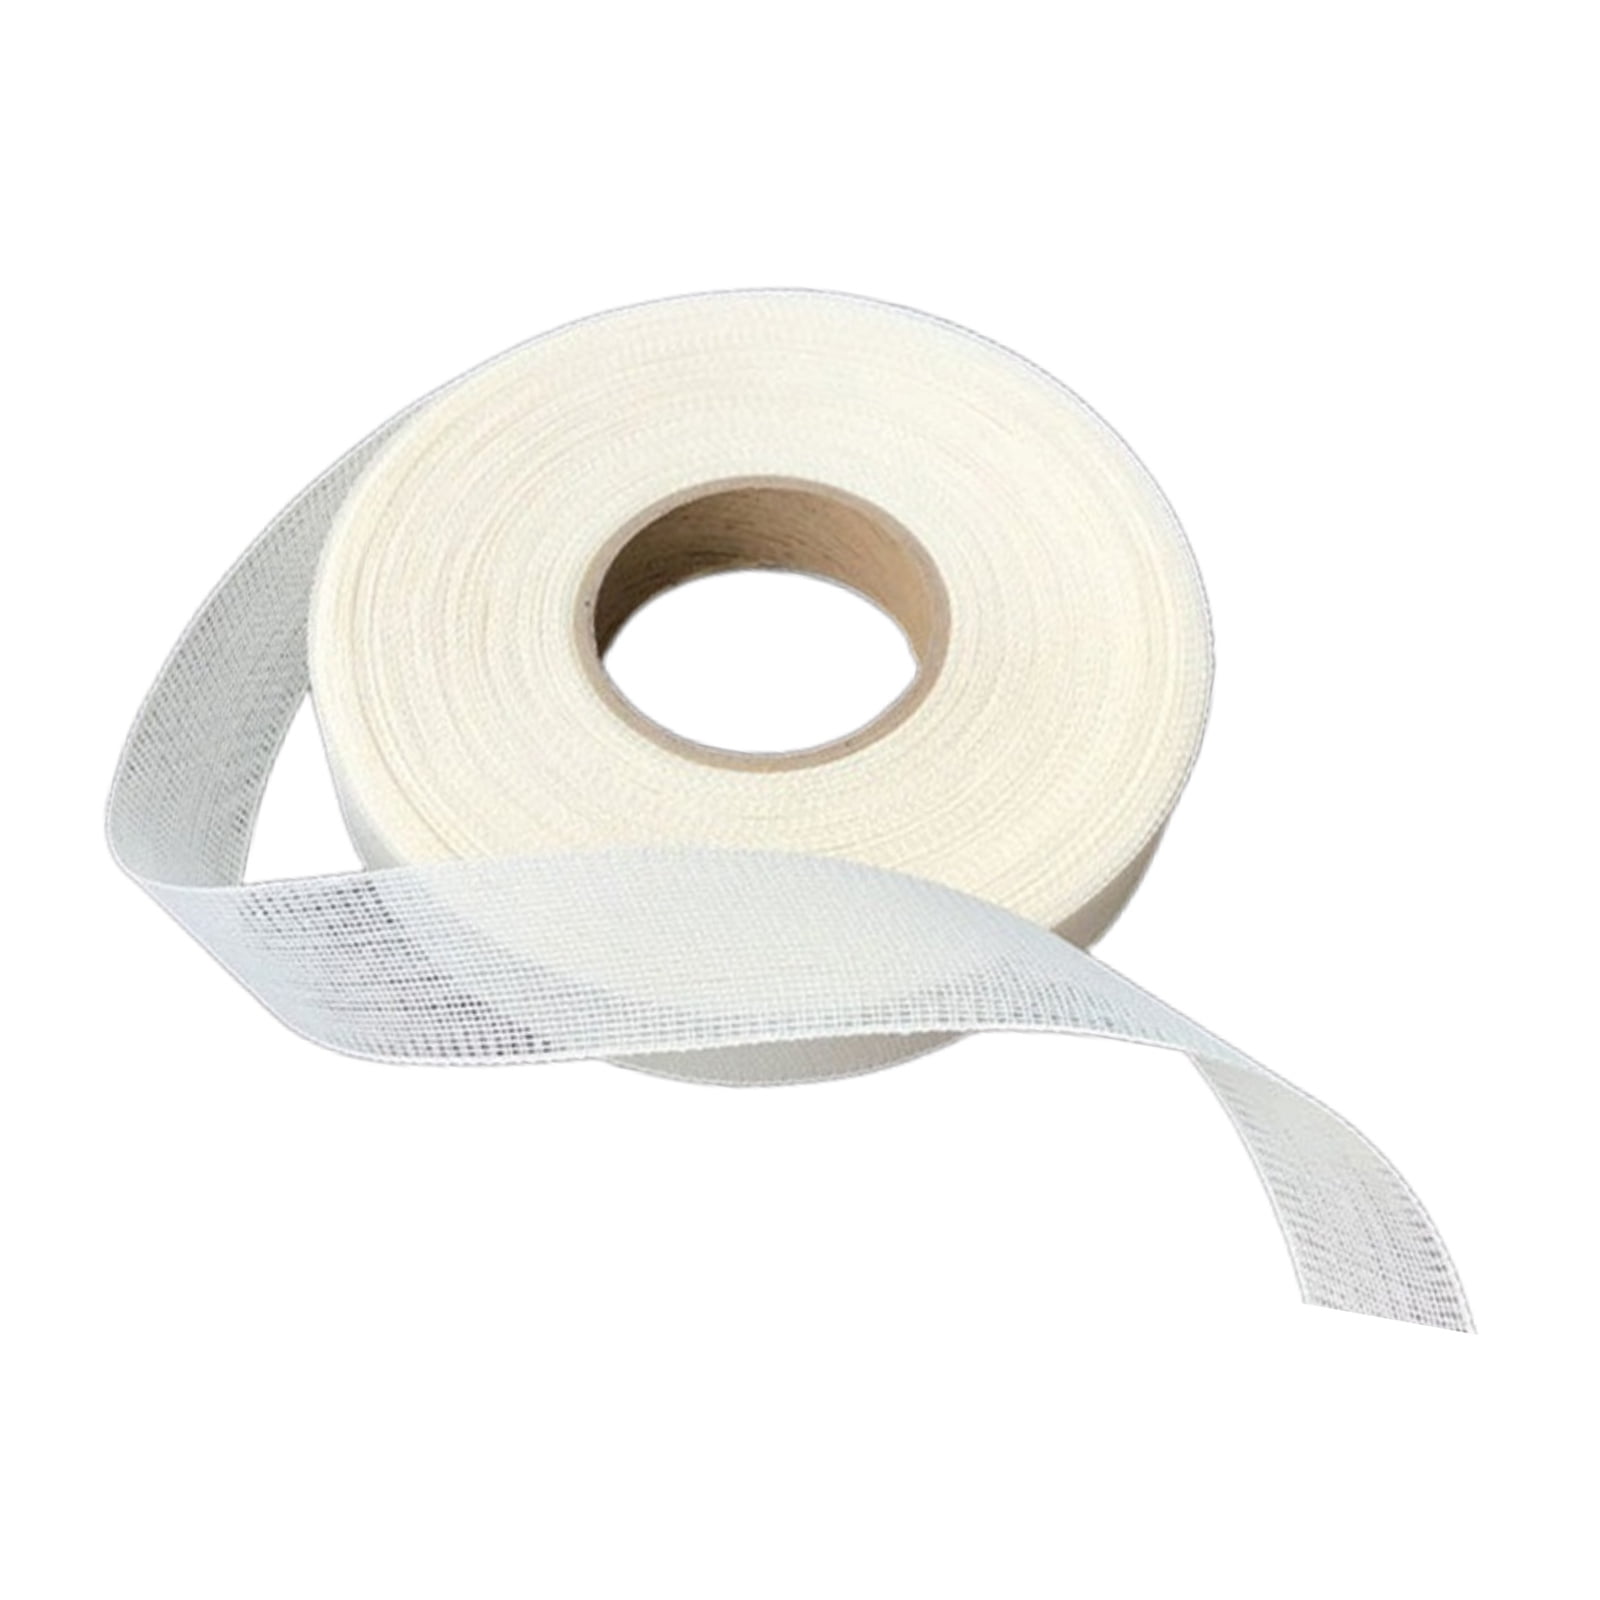 Ciieeo 10 Rolls Clothing Adhesive Interlining Dress Tape Fabric Tape for  Hemming Non-Woven Double-Sided Adhesive Tape No Sew Hemming Tape Curtain  Tape